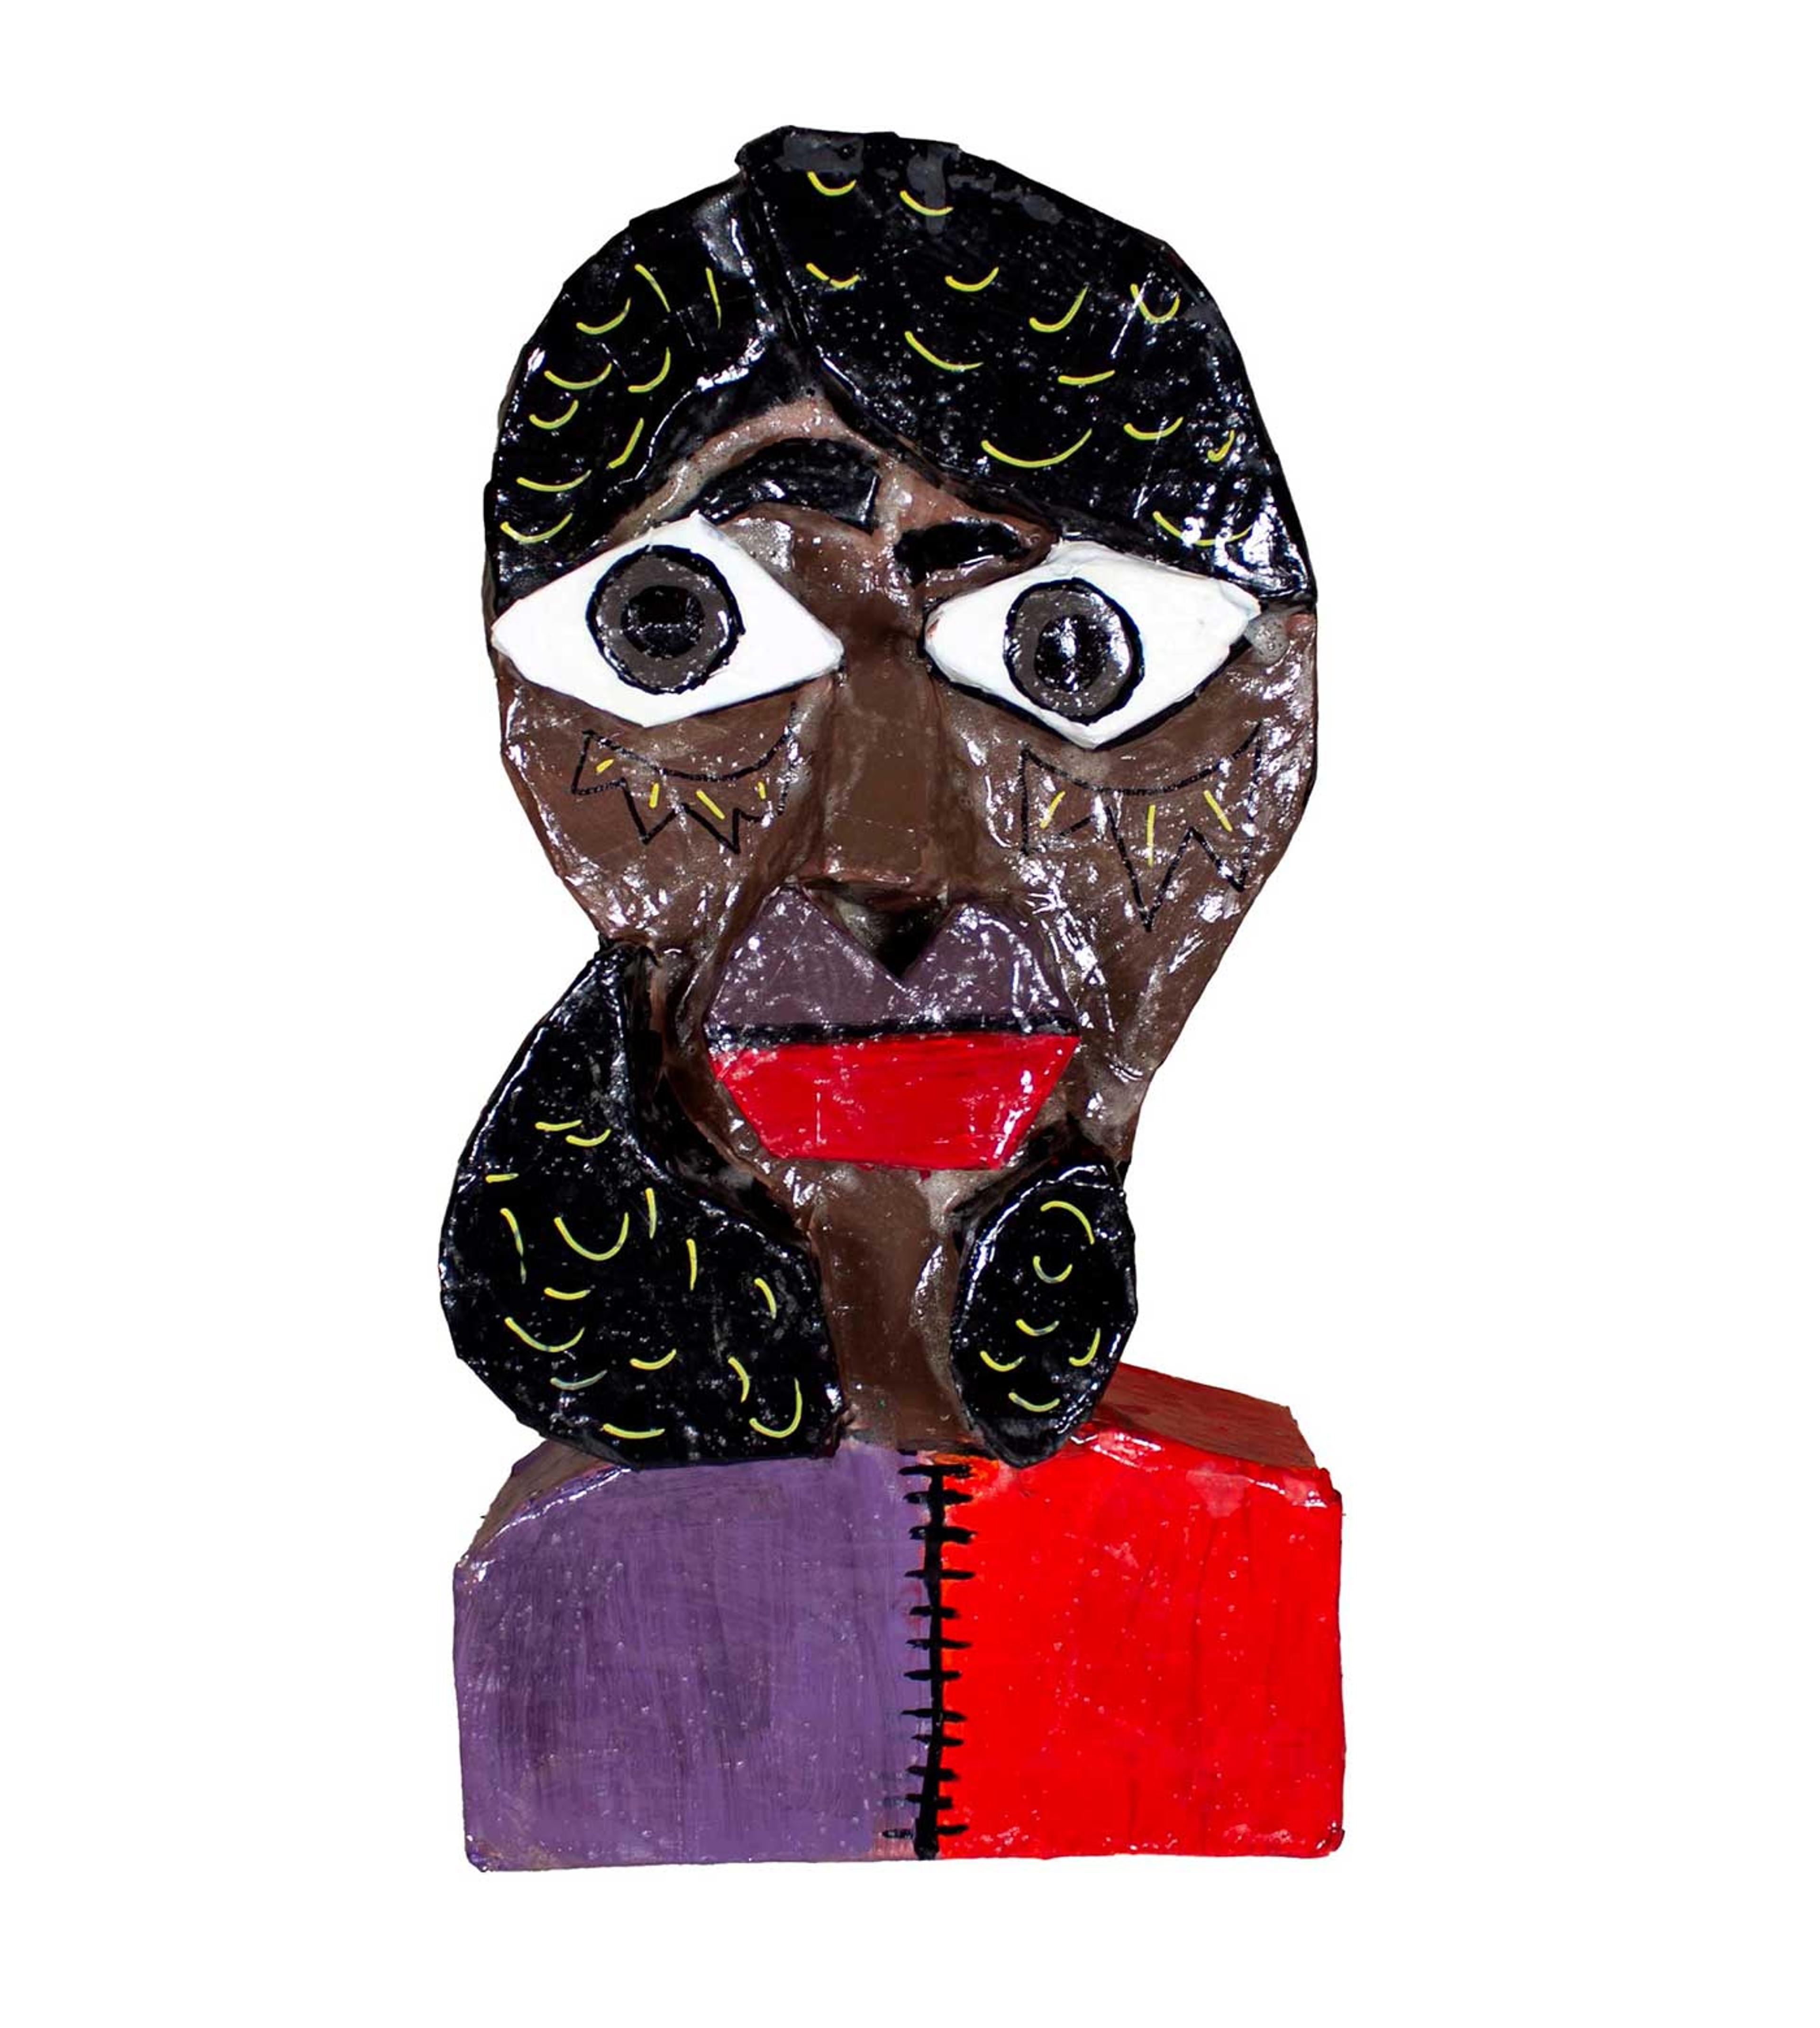 Bust of a young girl with dark brown skin, black hair, and a red and purple shirt.